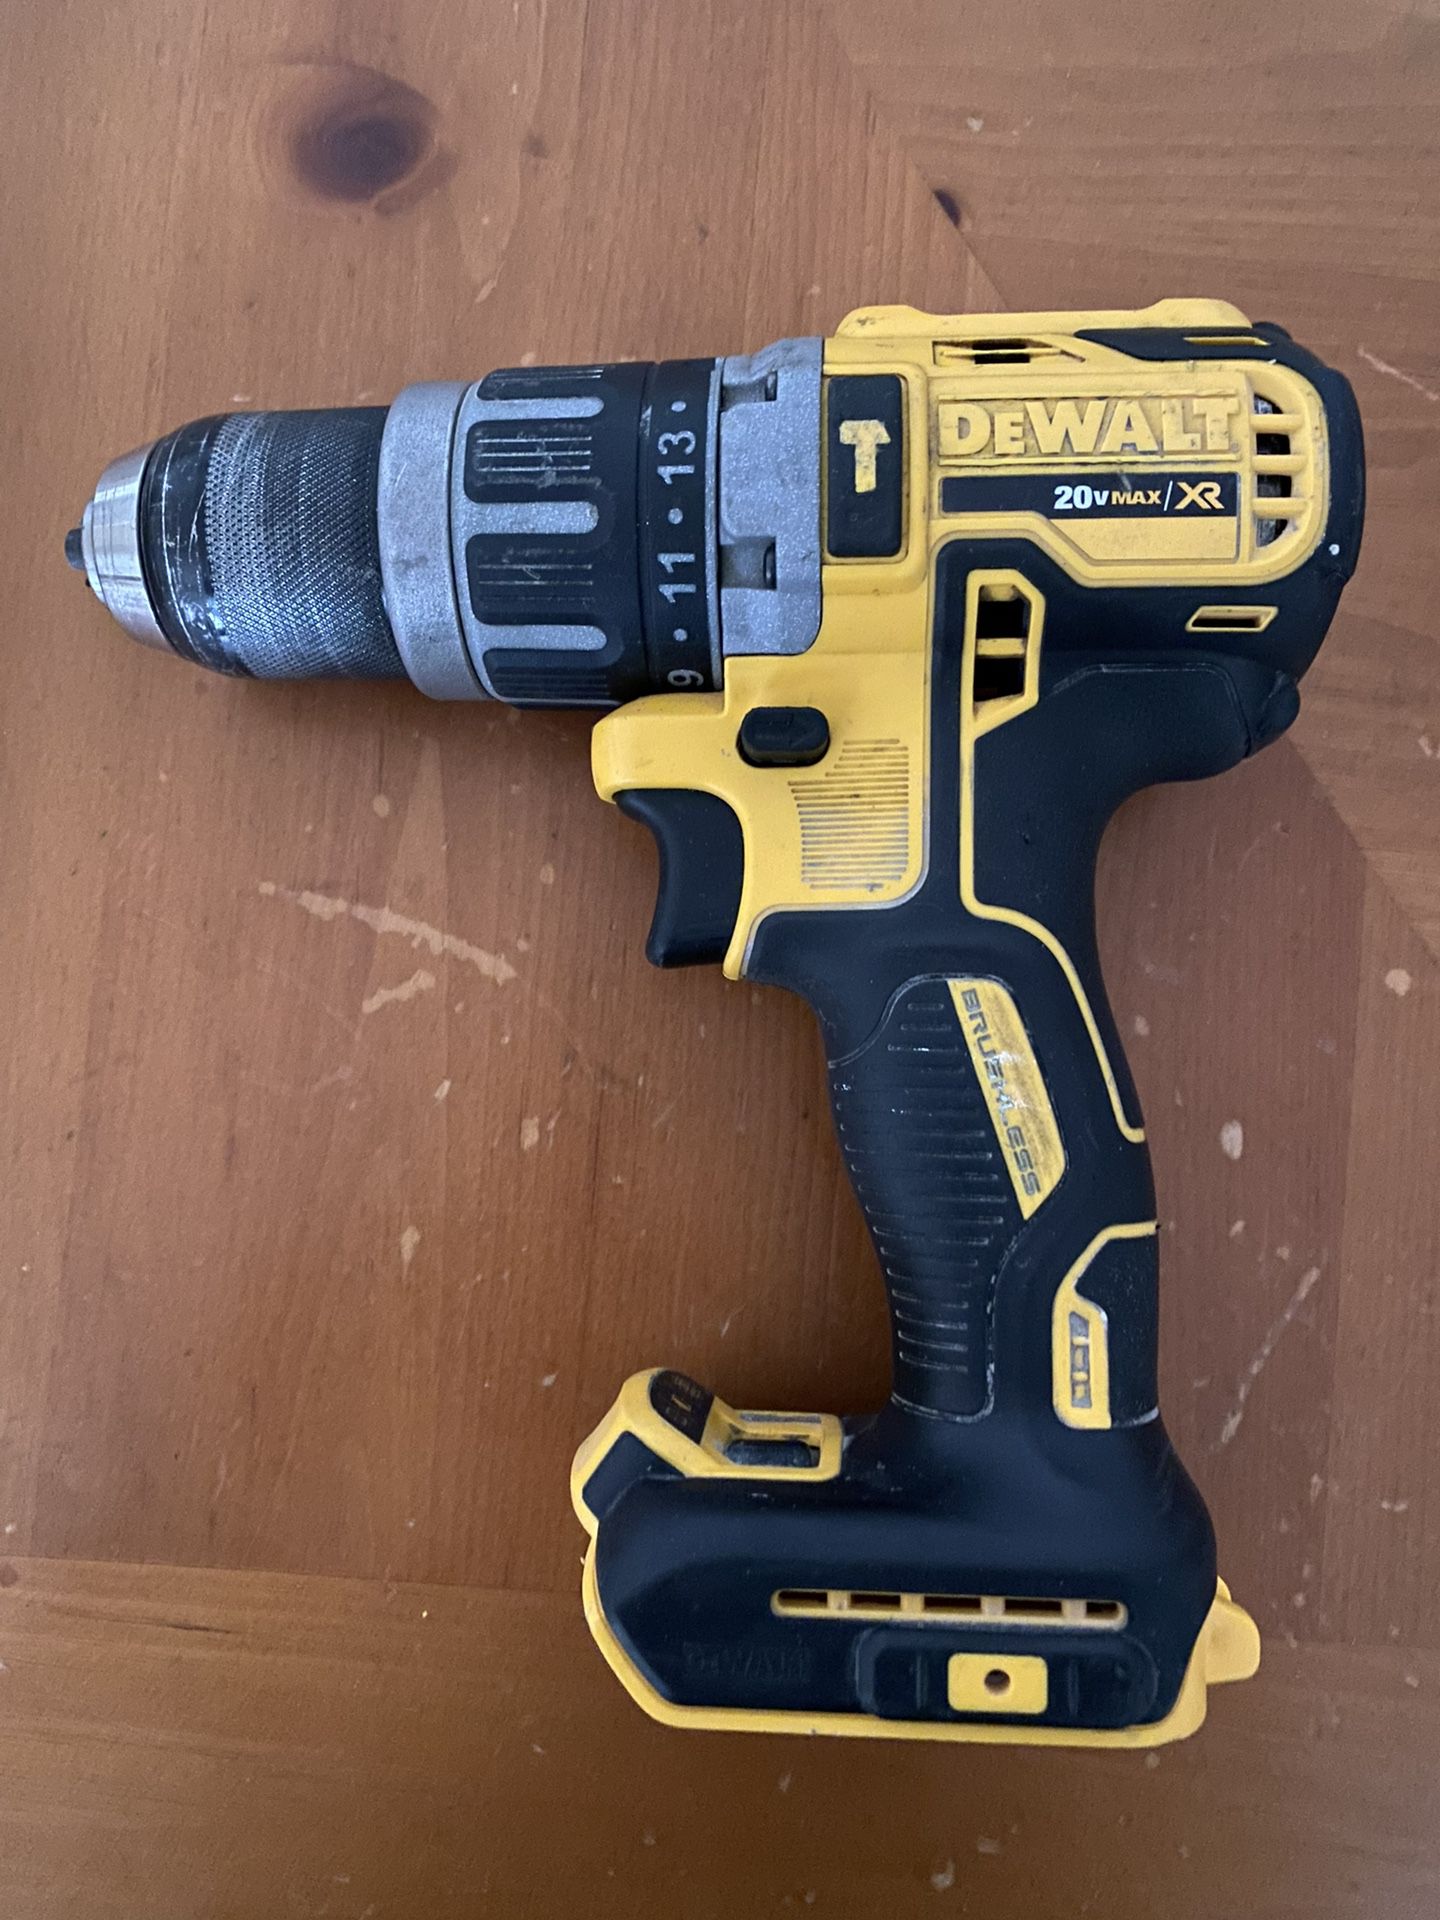 Dewalt Hammer Drill Used - Battery Not Included